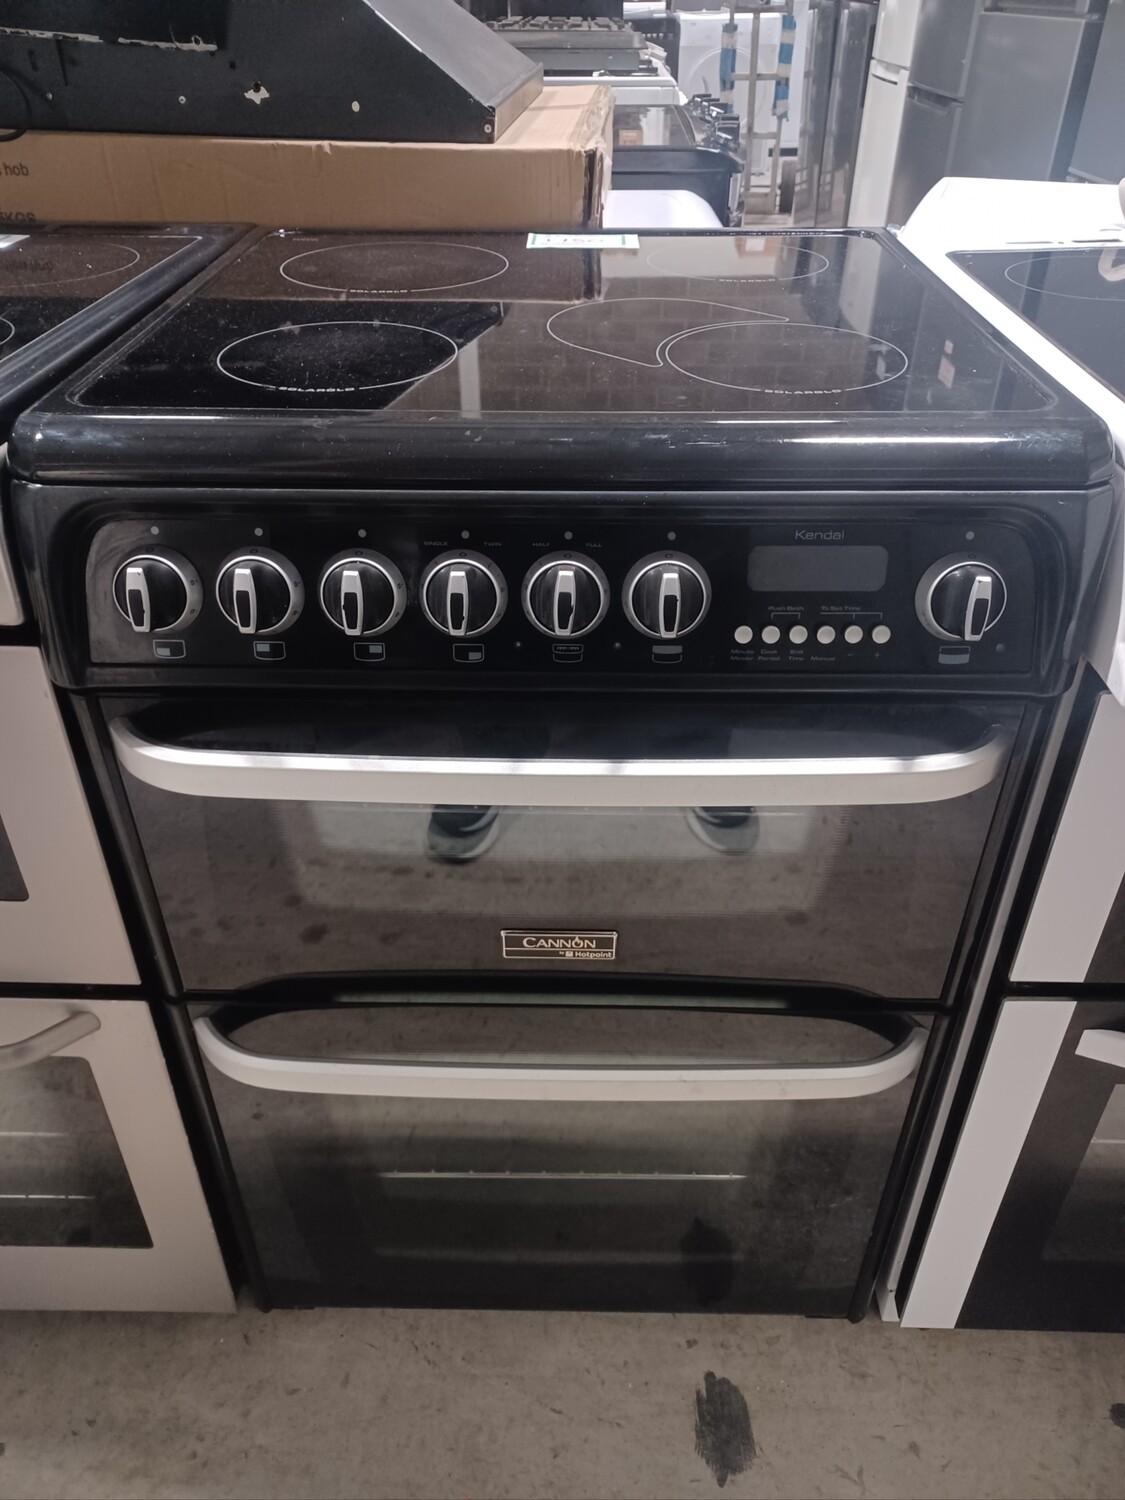 Hotpoint 60cm Electric cooker Twin Cavity Black - Refurbished + 6 month guarantee 